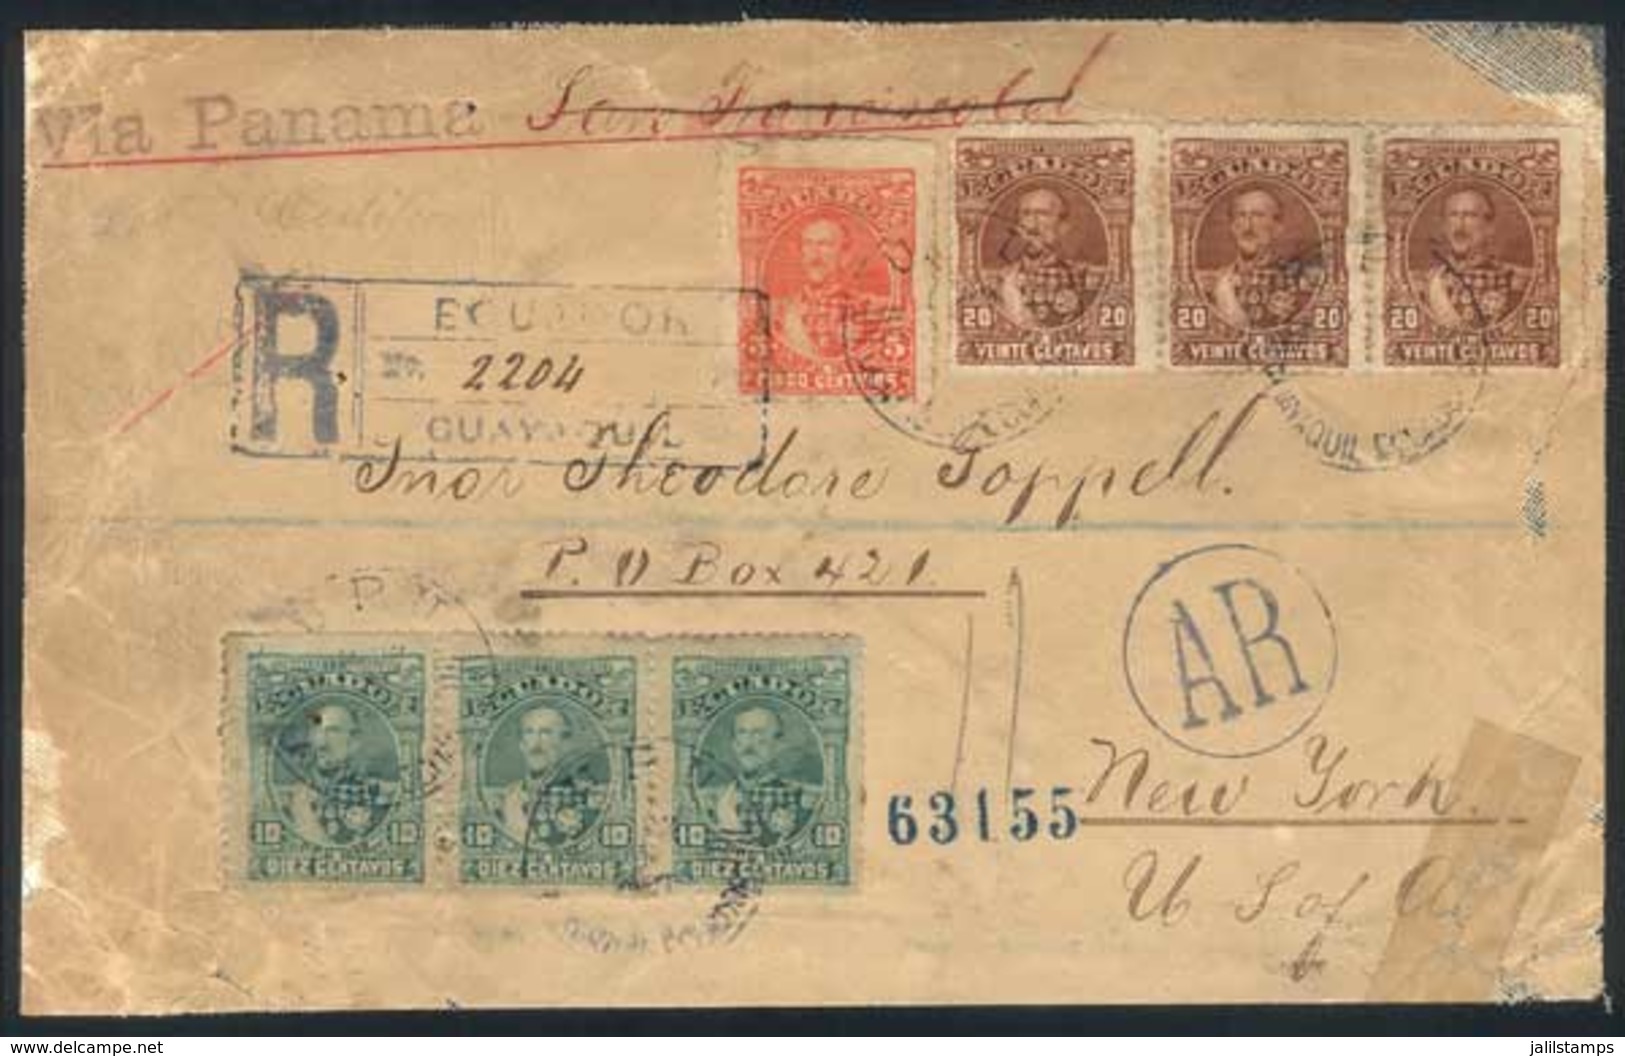 ECUADOR: Front Of Registered Cover With AR, Franked By Sc.25 (5c.) + Strip Of 3 Sc.26 (10c.) + Strip Of 3 Sc.27 (20c.),  - Ecuador